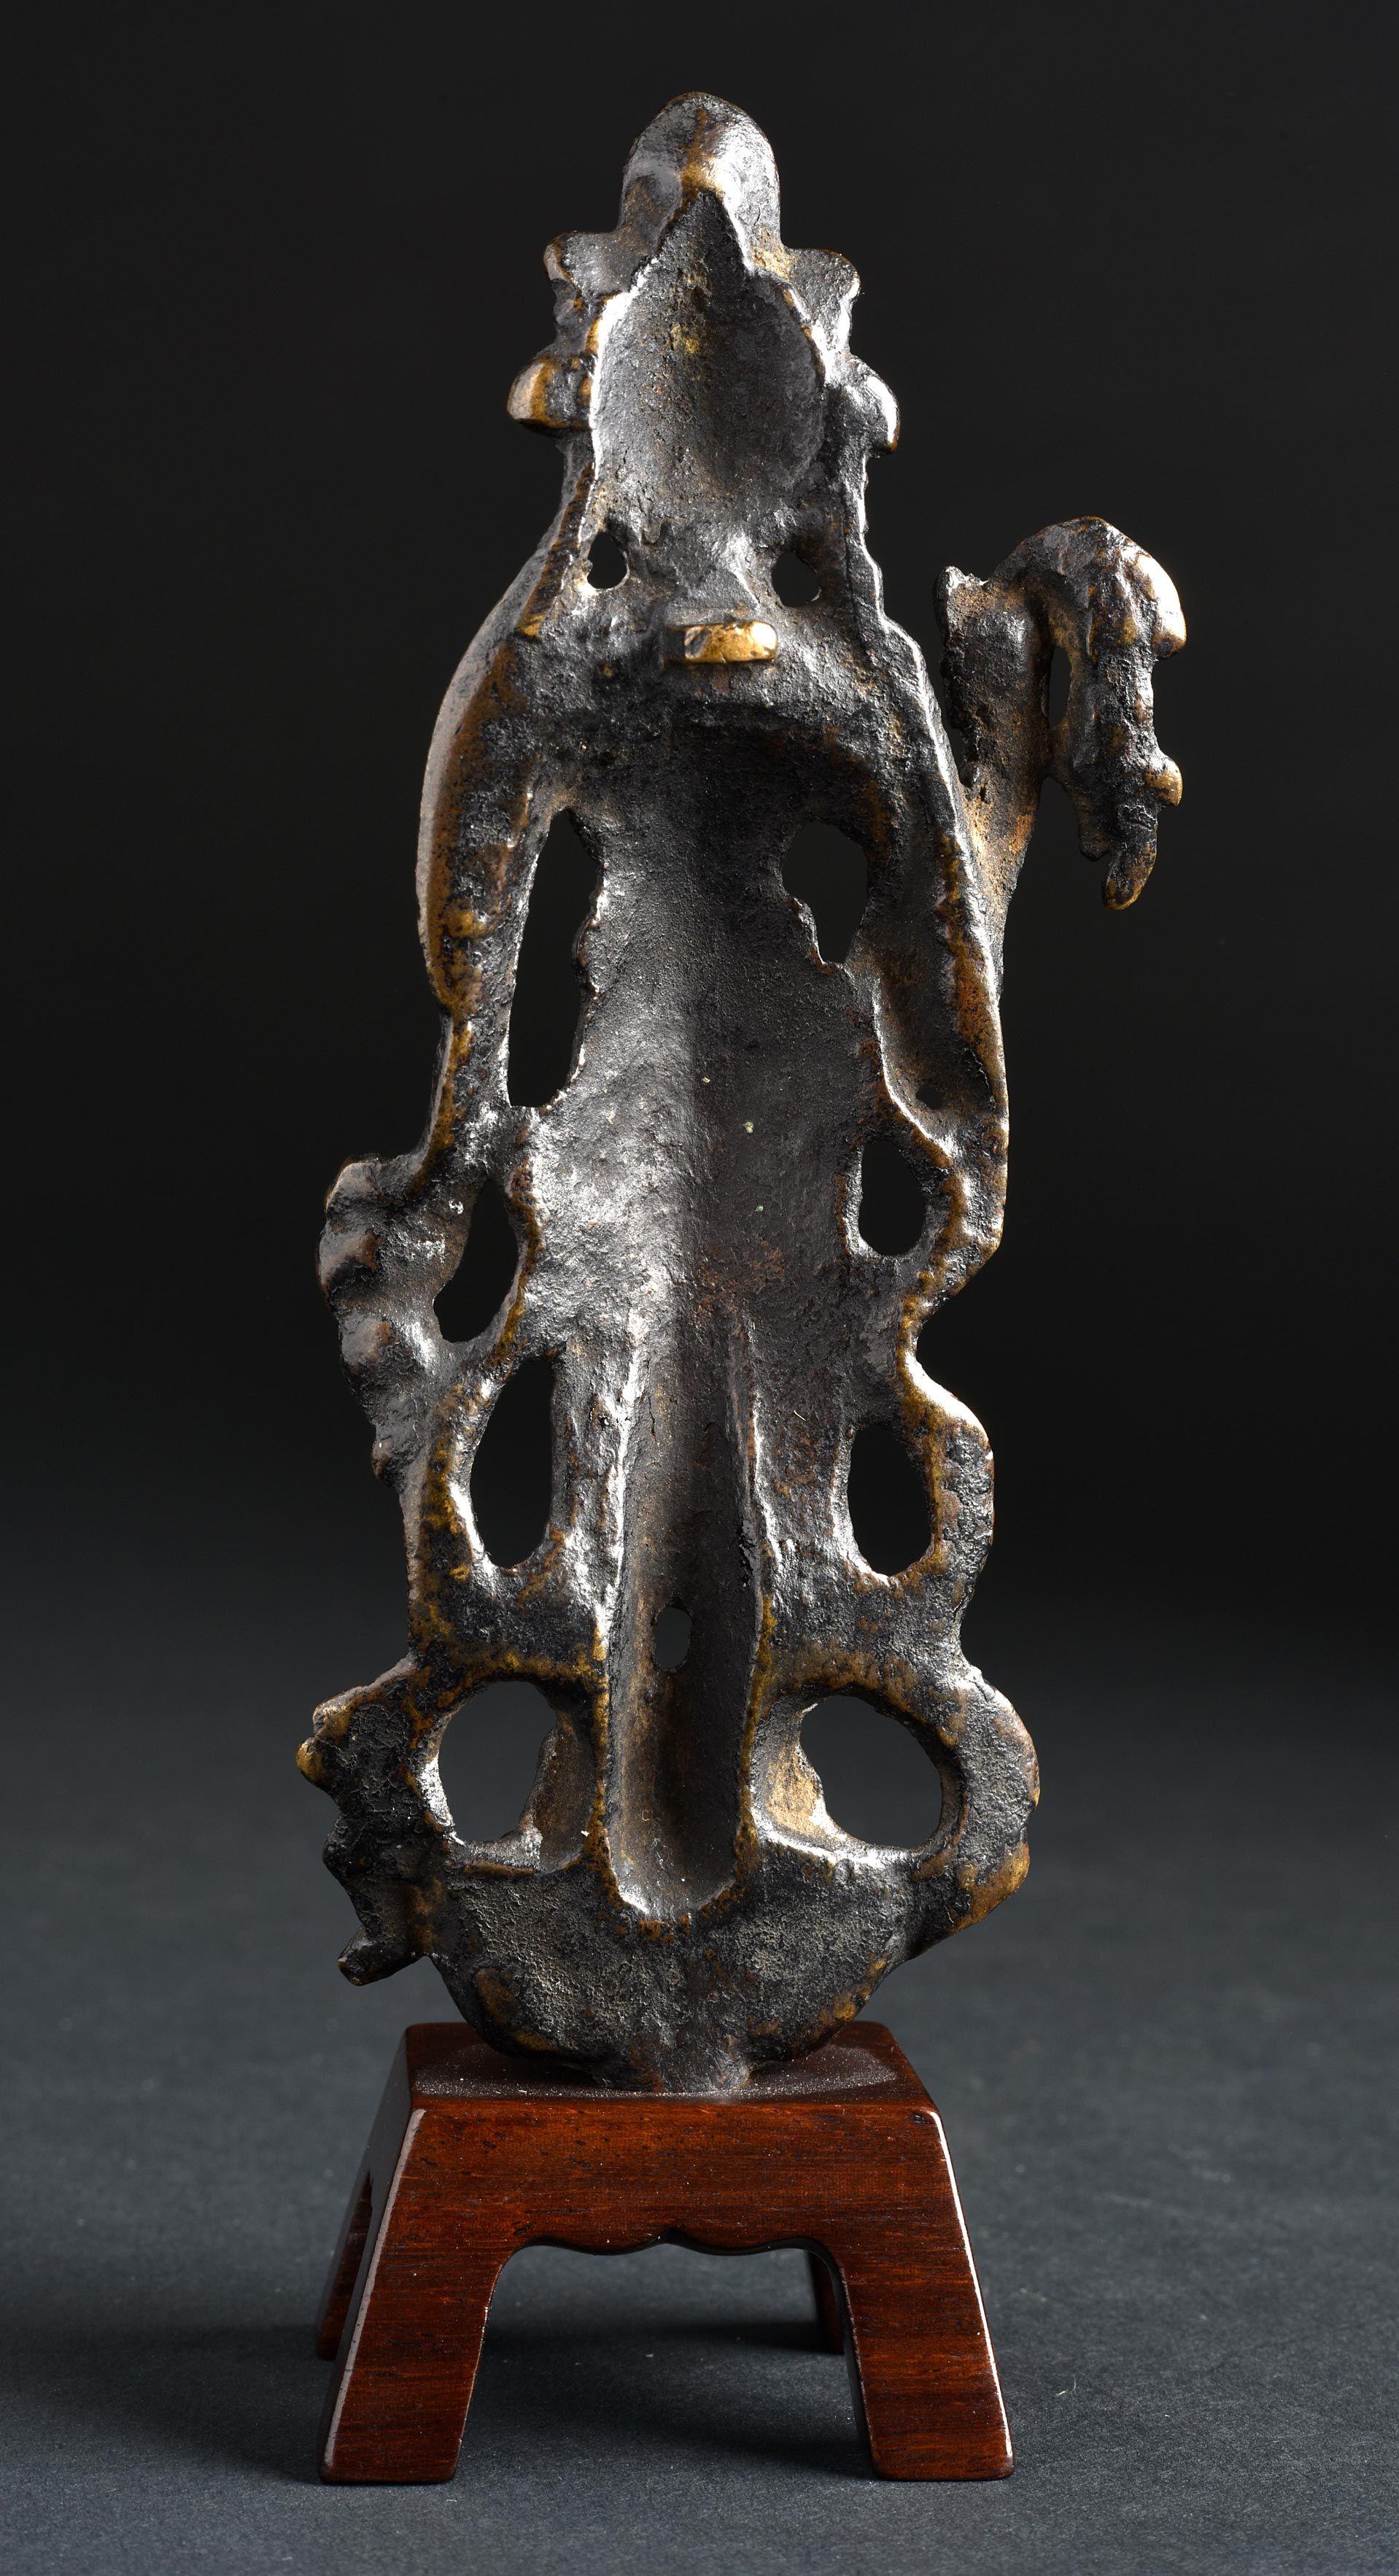 6-9th C Chinese bronze Bodhisattva of compassion from the Tang Dynasty. This piece has a great face and real finesse in the sculpting. The casting is a quality that is only found on high-quality examples. For example-note the complexity of the